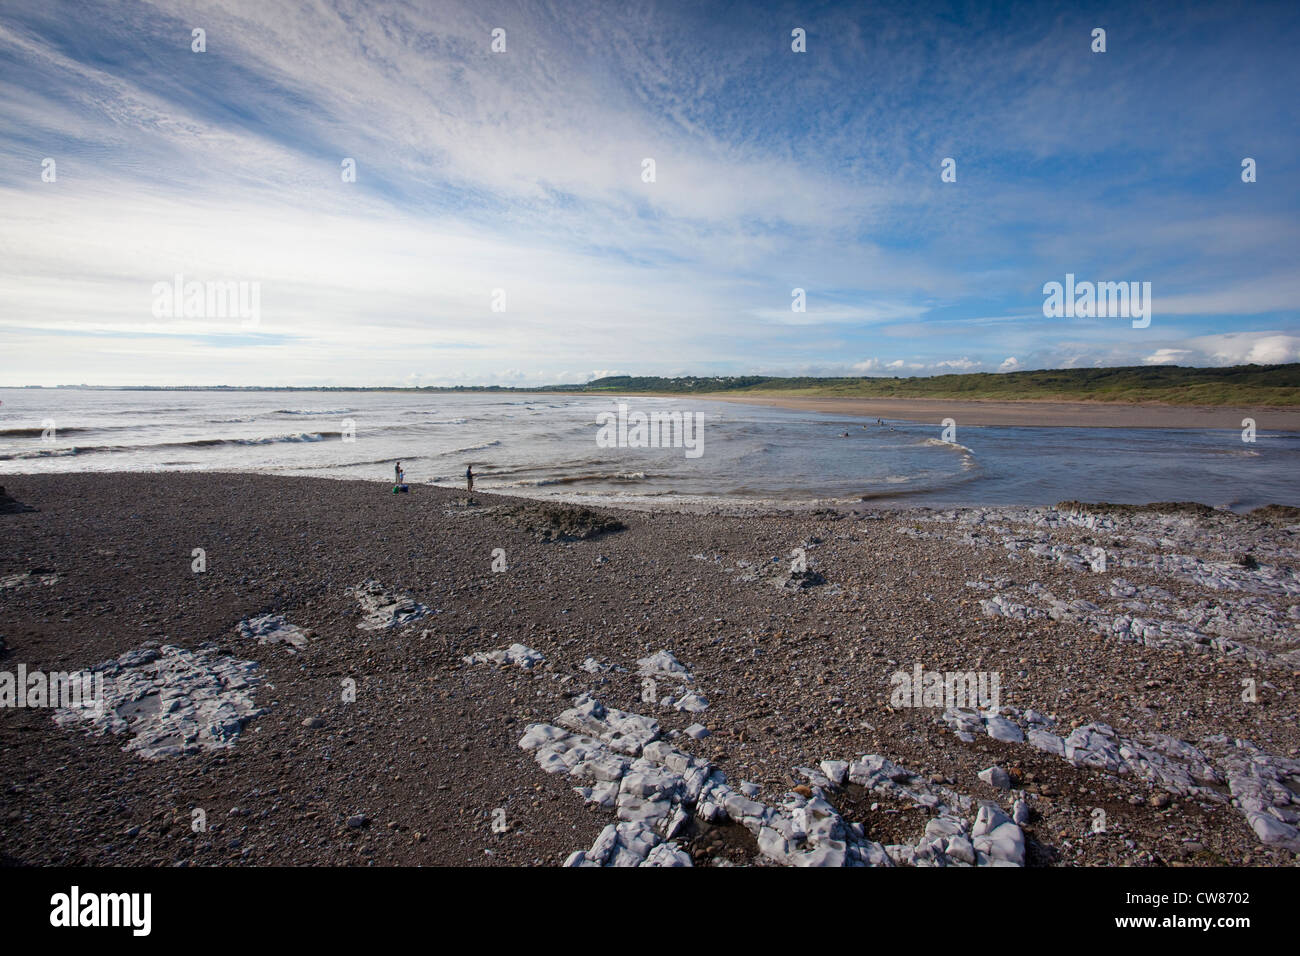 Ogmore-by-Sea, Vale of Glamorgan, Wales, part of the Glamorgan Heritage Coastline of South Wales, UK Stock Photo